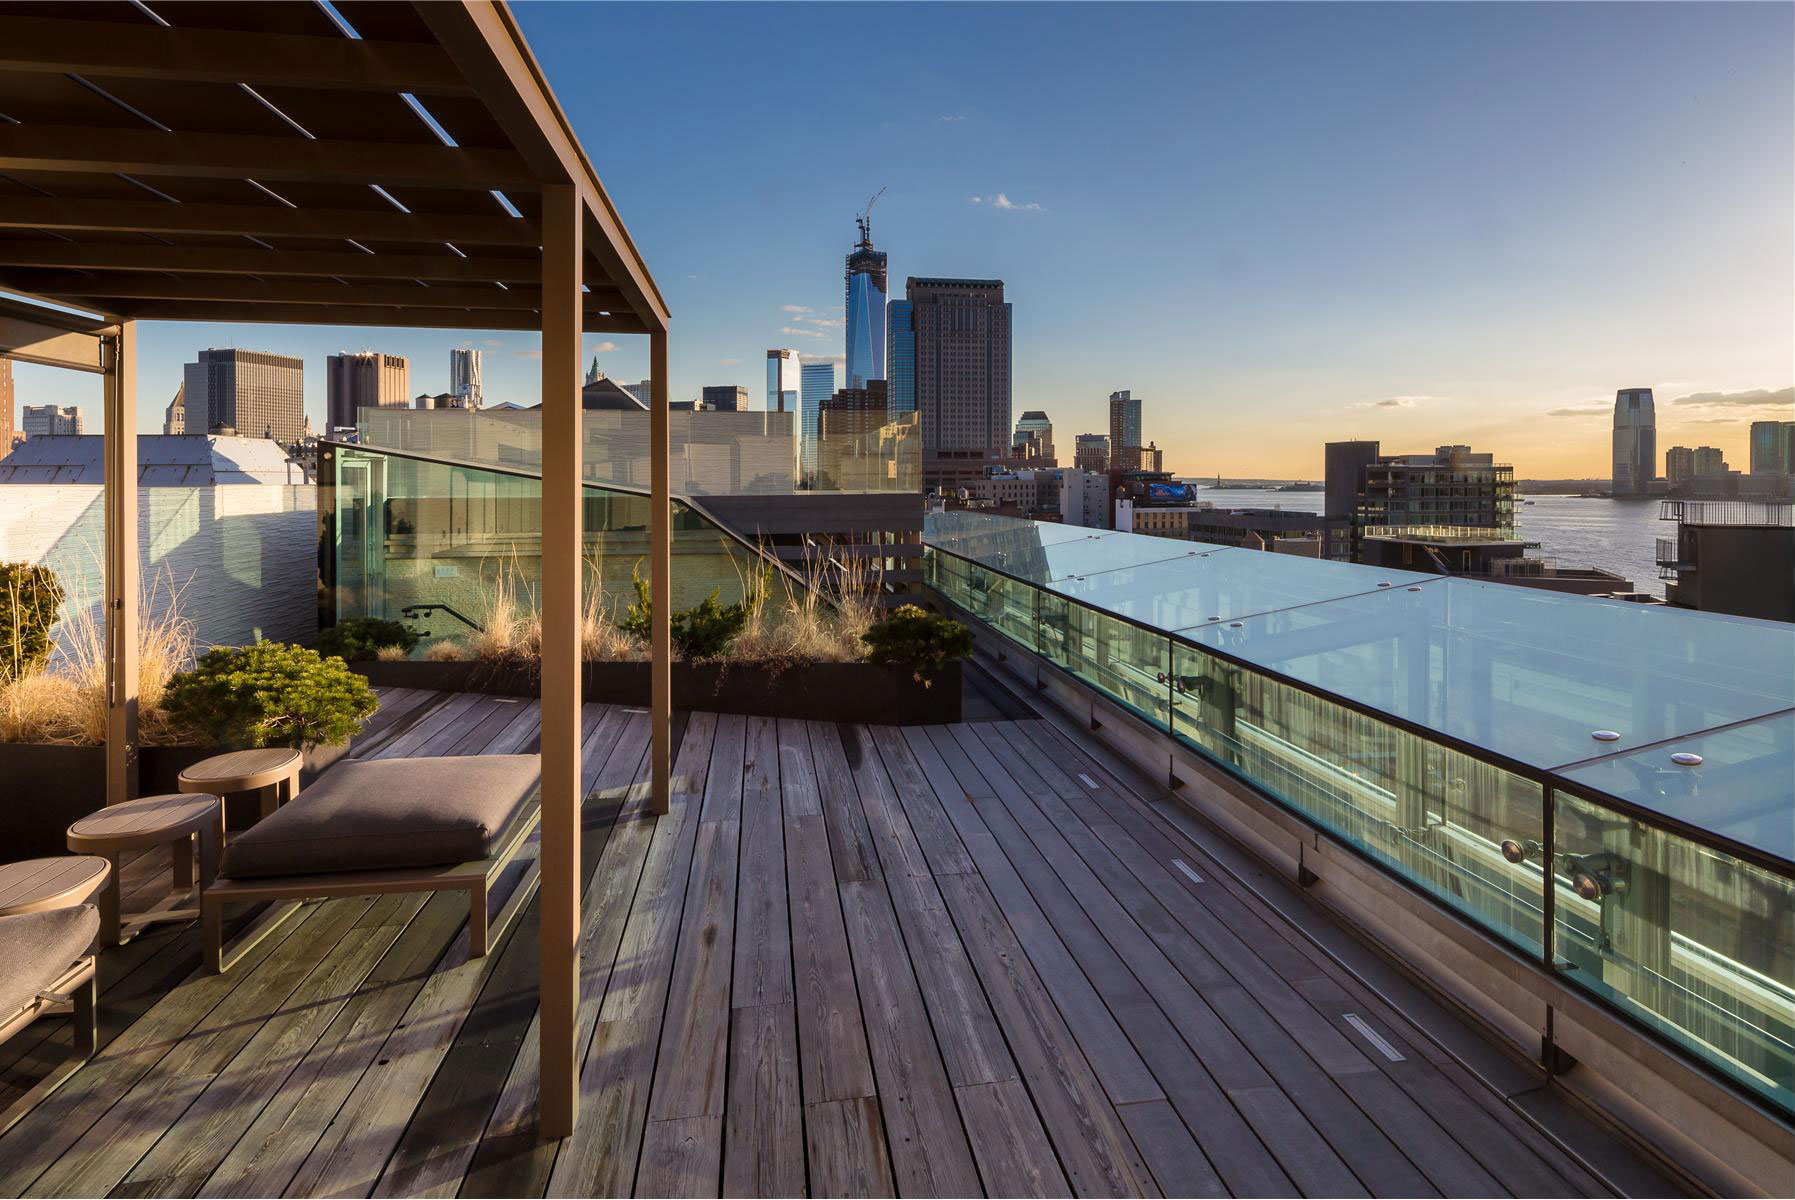 Architectural Greenwich Rustic Modern Architectural Greenwich Street Project Rustic Wood Floor Appealing Padded Bench And Round Wood Stools Ornamental Plants Wood Canopy Architecture Stunning Steel And Glass Structure Reflected In 497 Greenwich Street Penthouse